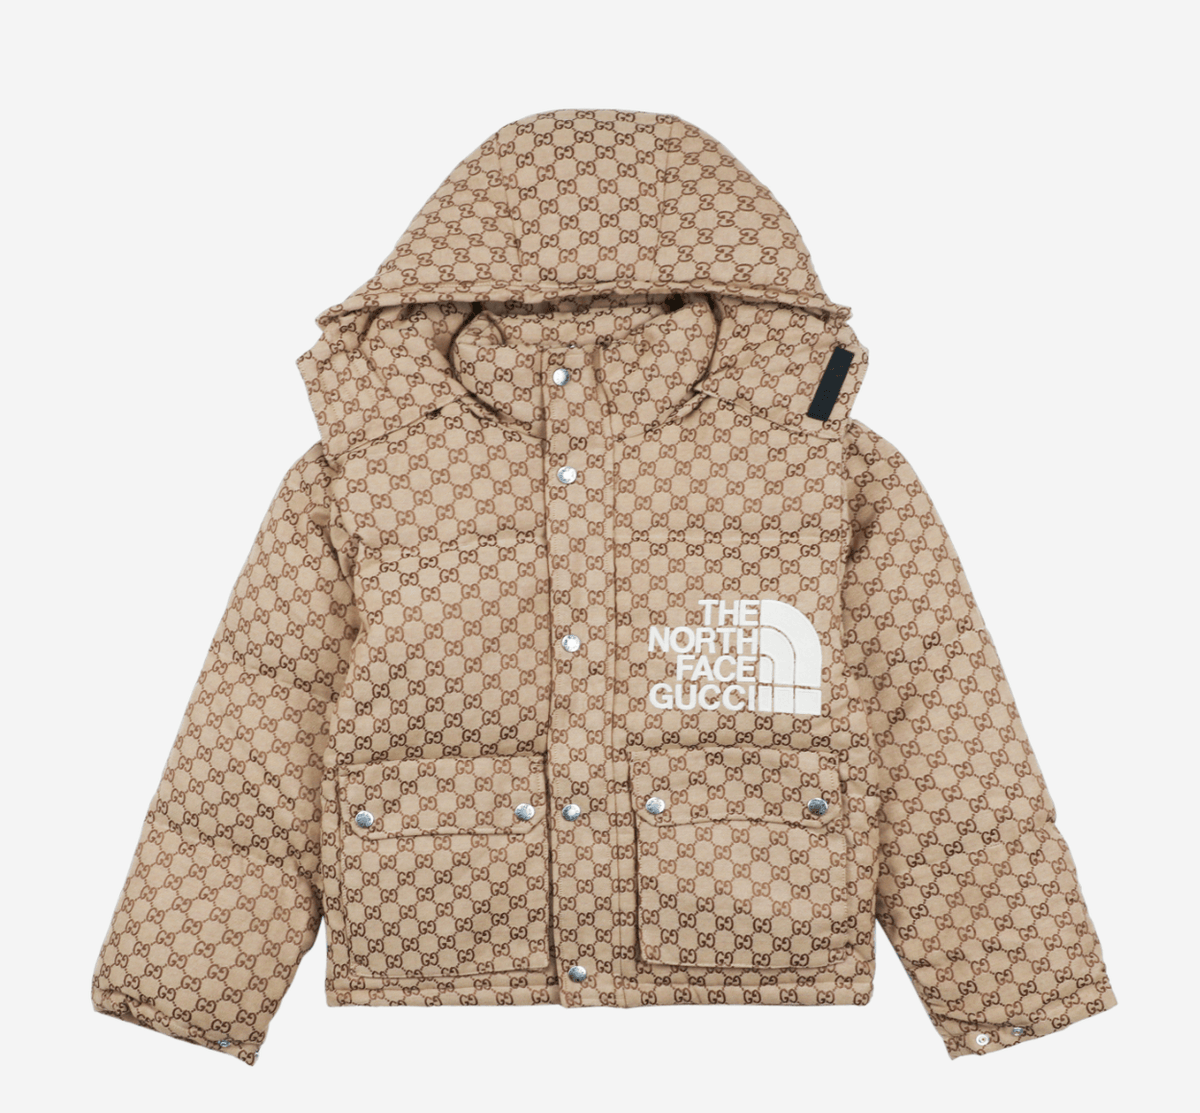 GUCCI x THE NORTH FACE JACKET